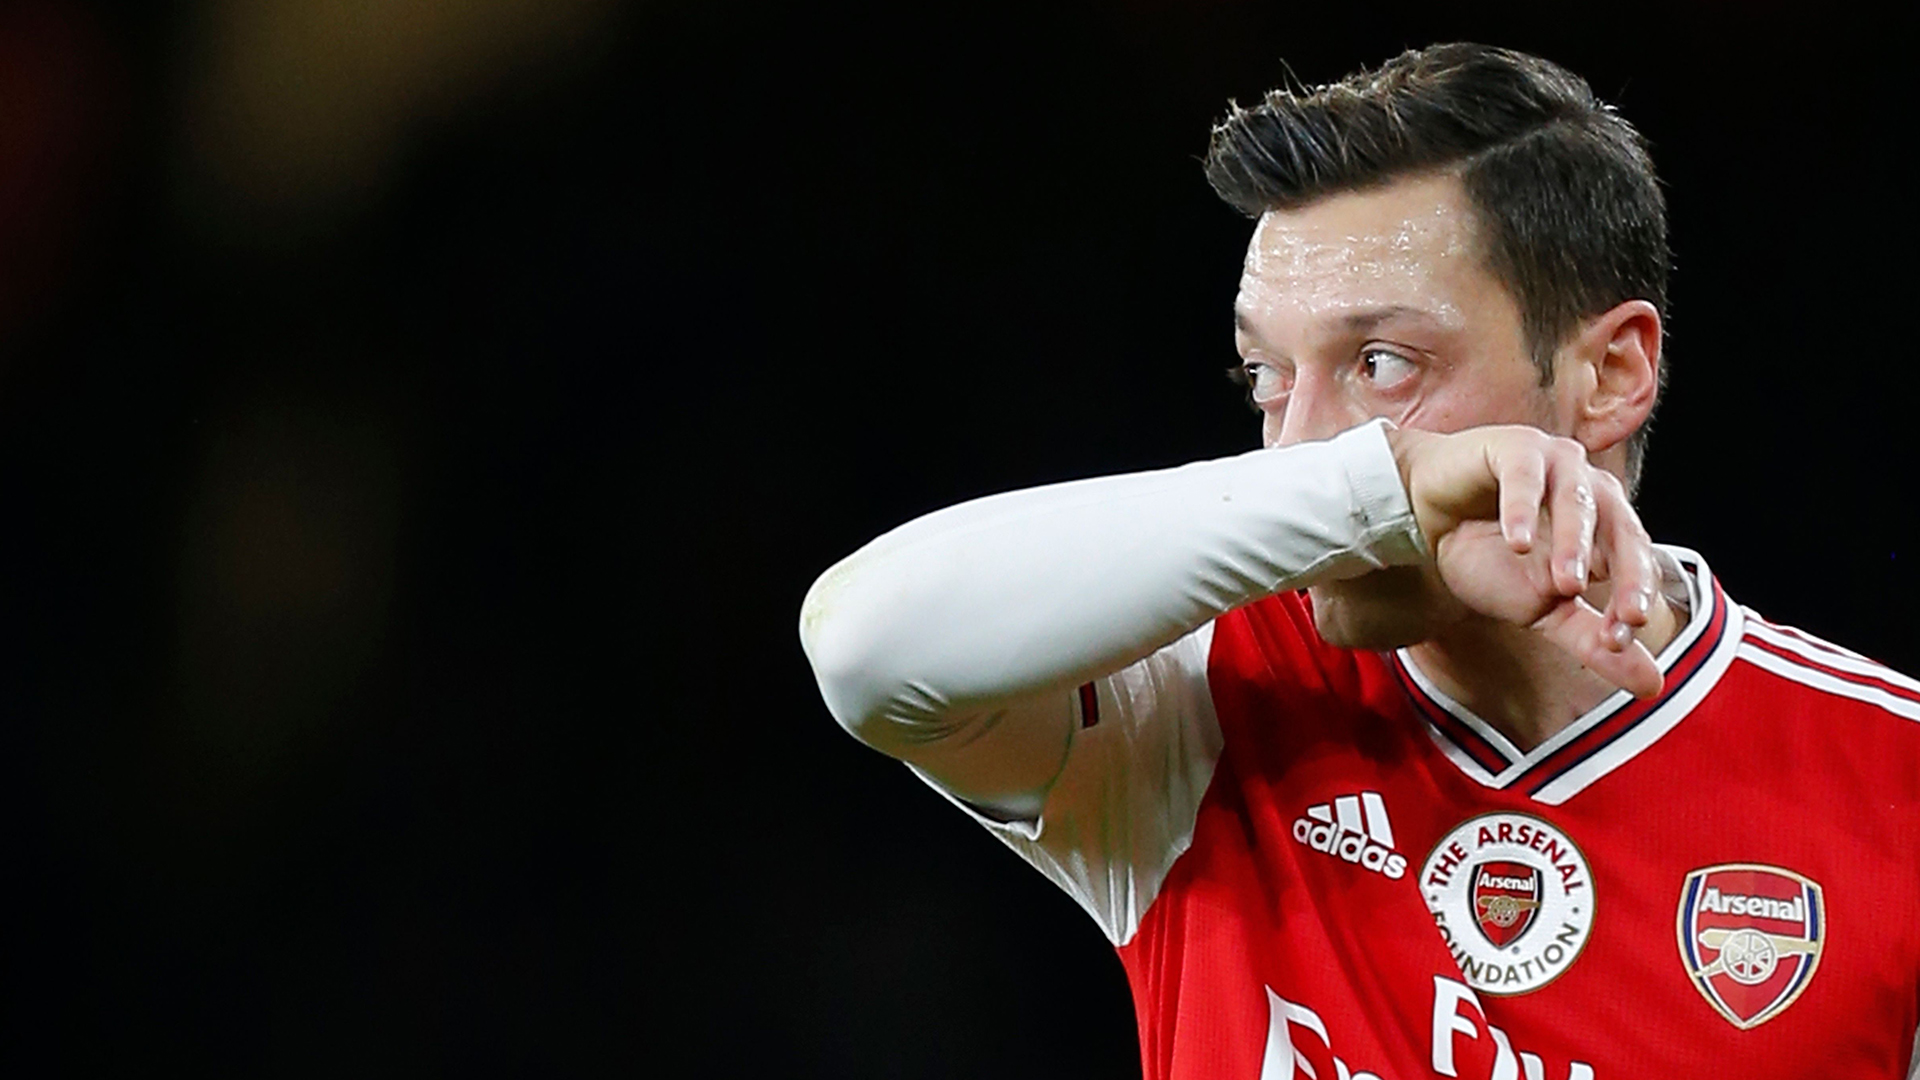 'People have been trying to destroy me' - Ozil explains why he didn't take Arsenal pay cut despite £350k-a-week wages